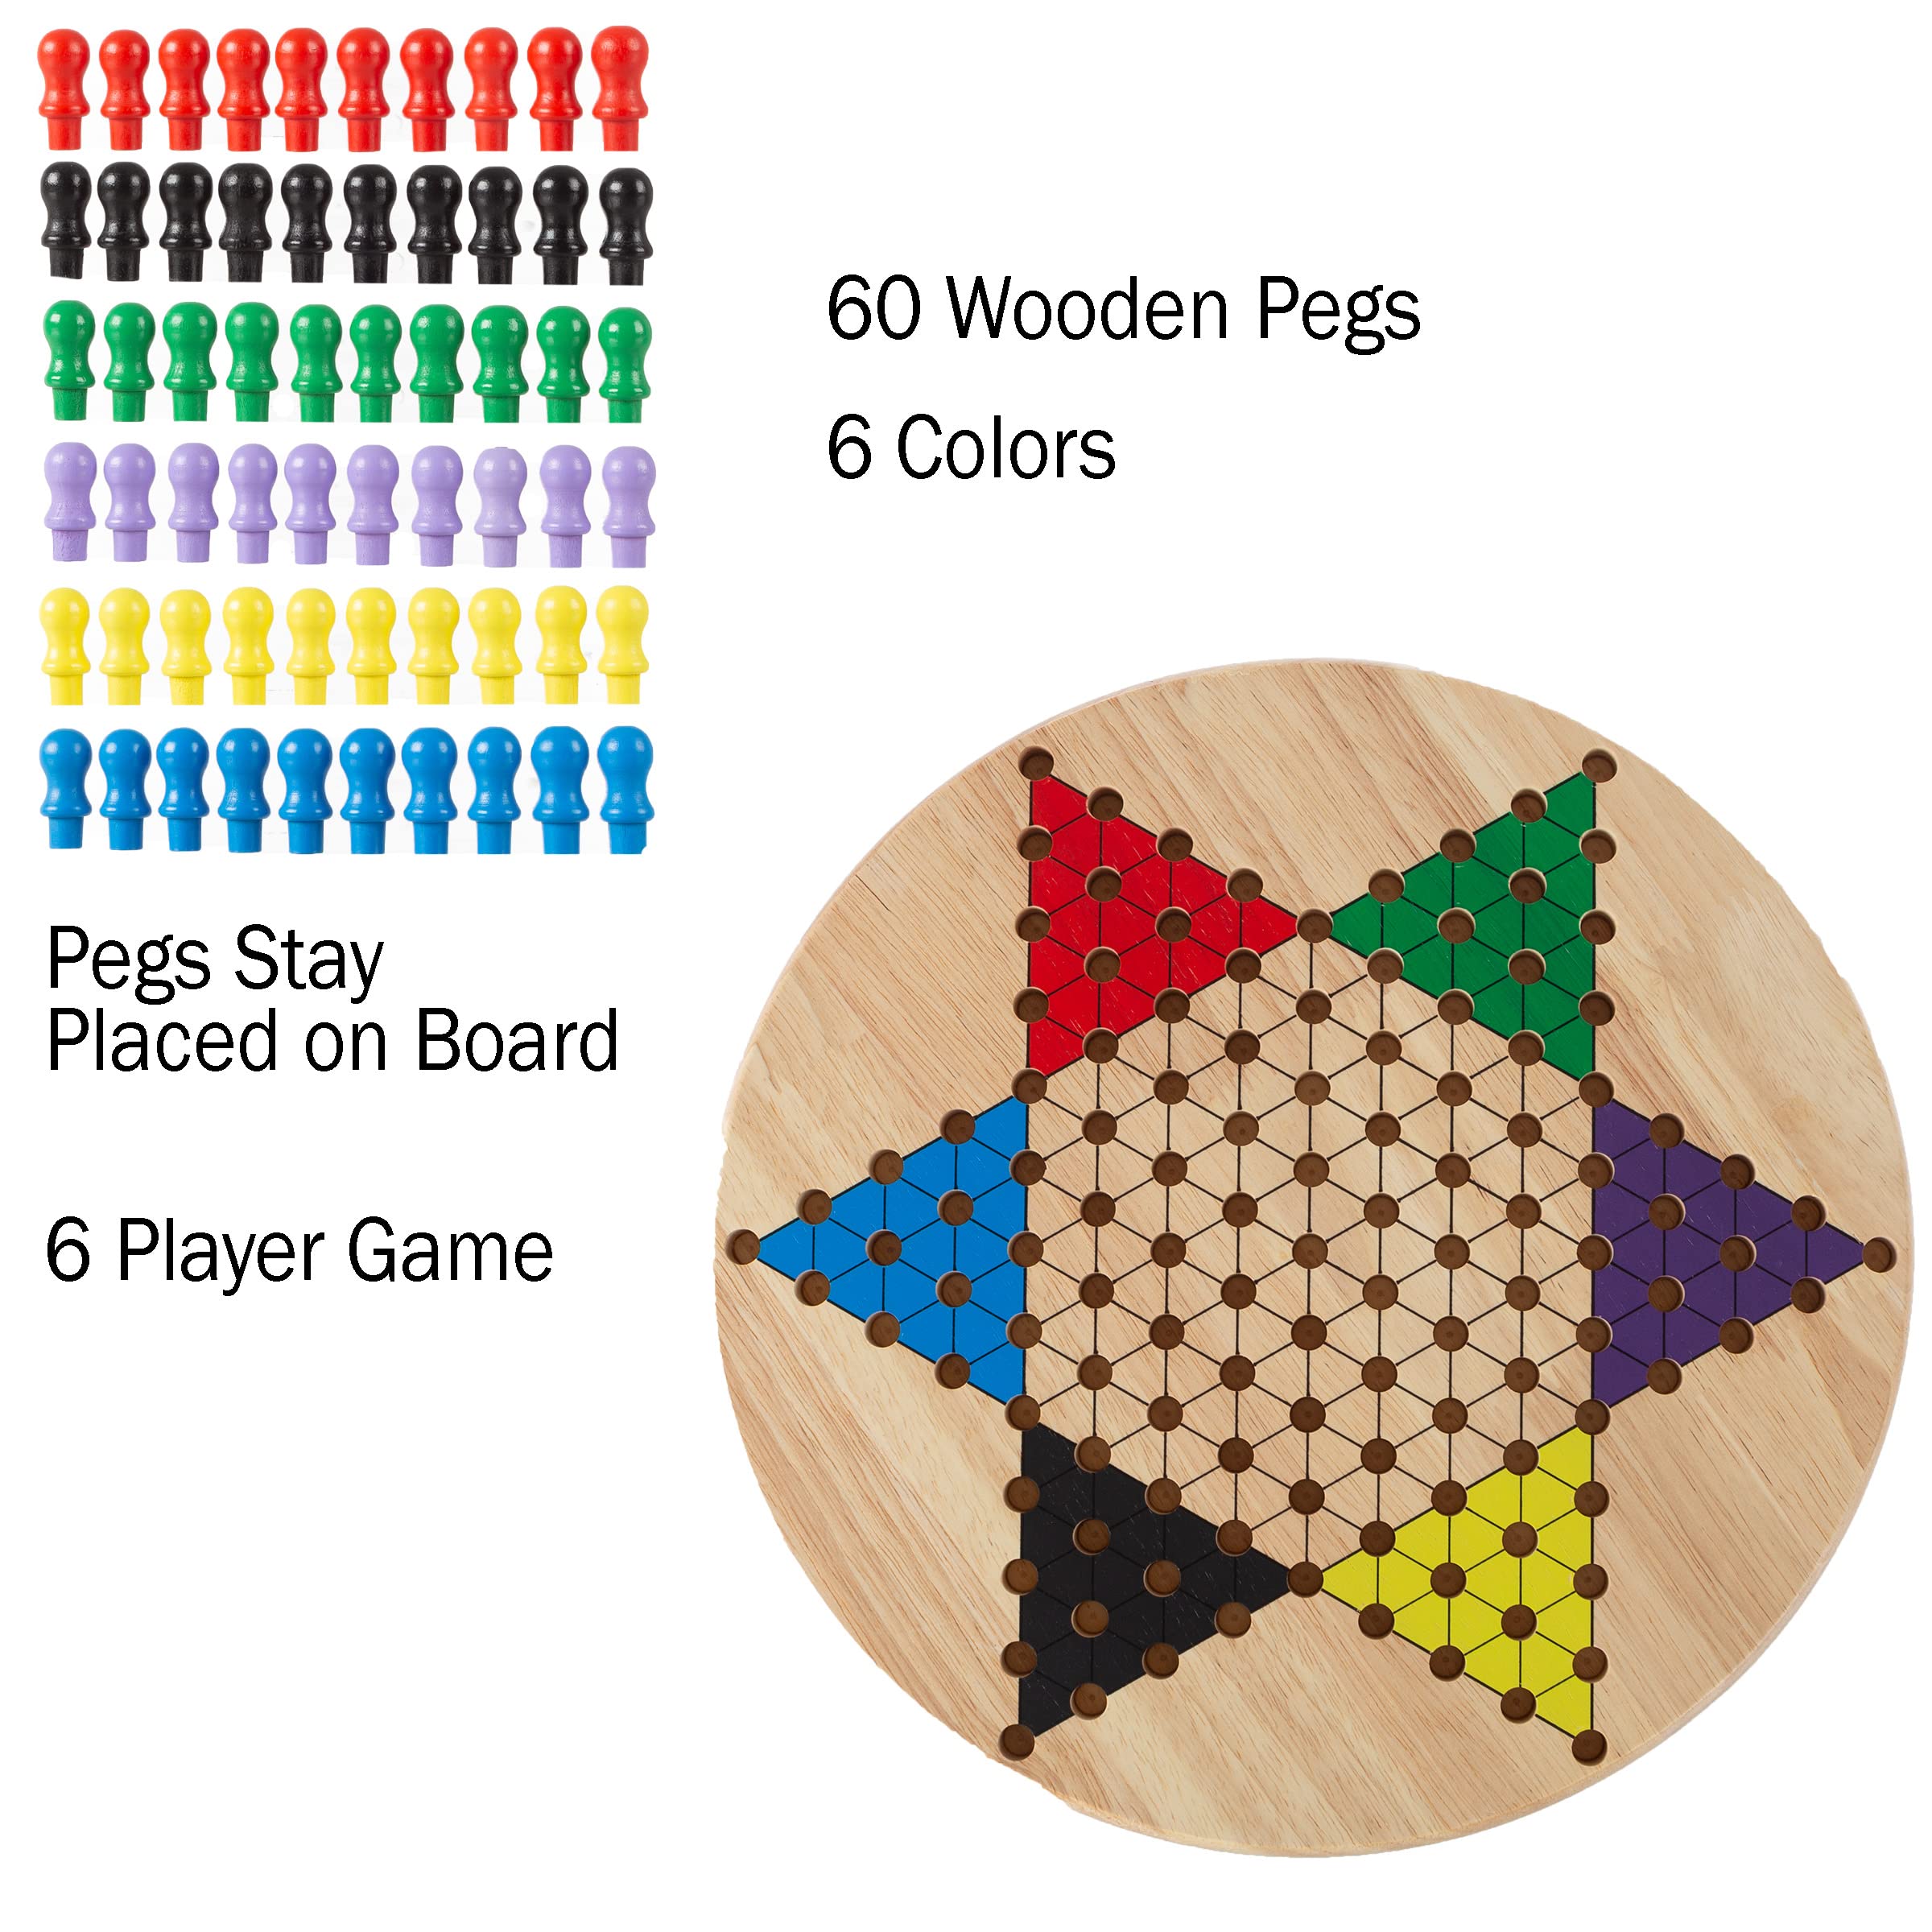 Chinese Checkers Game Set with 11 inch Wooden Board and Traditional Pegs, Game for Adults, Boys and Girls by Hey! Play!